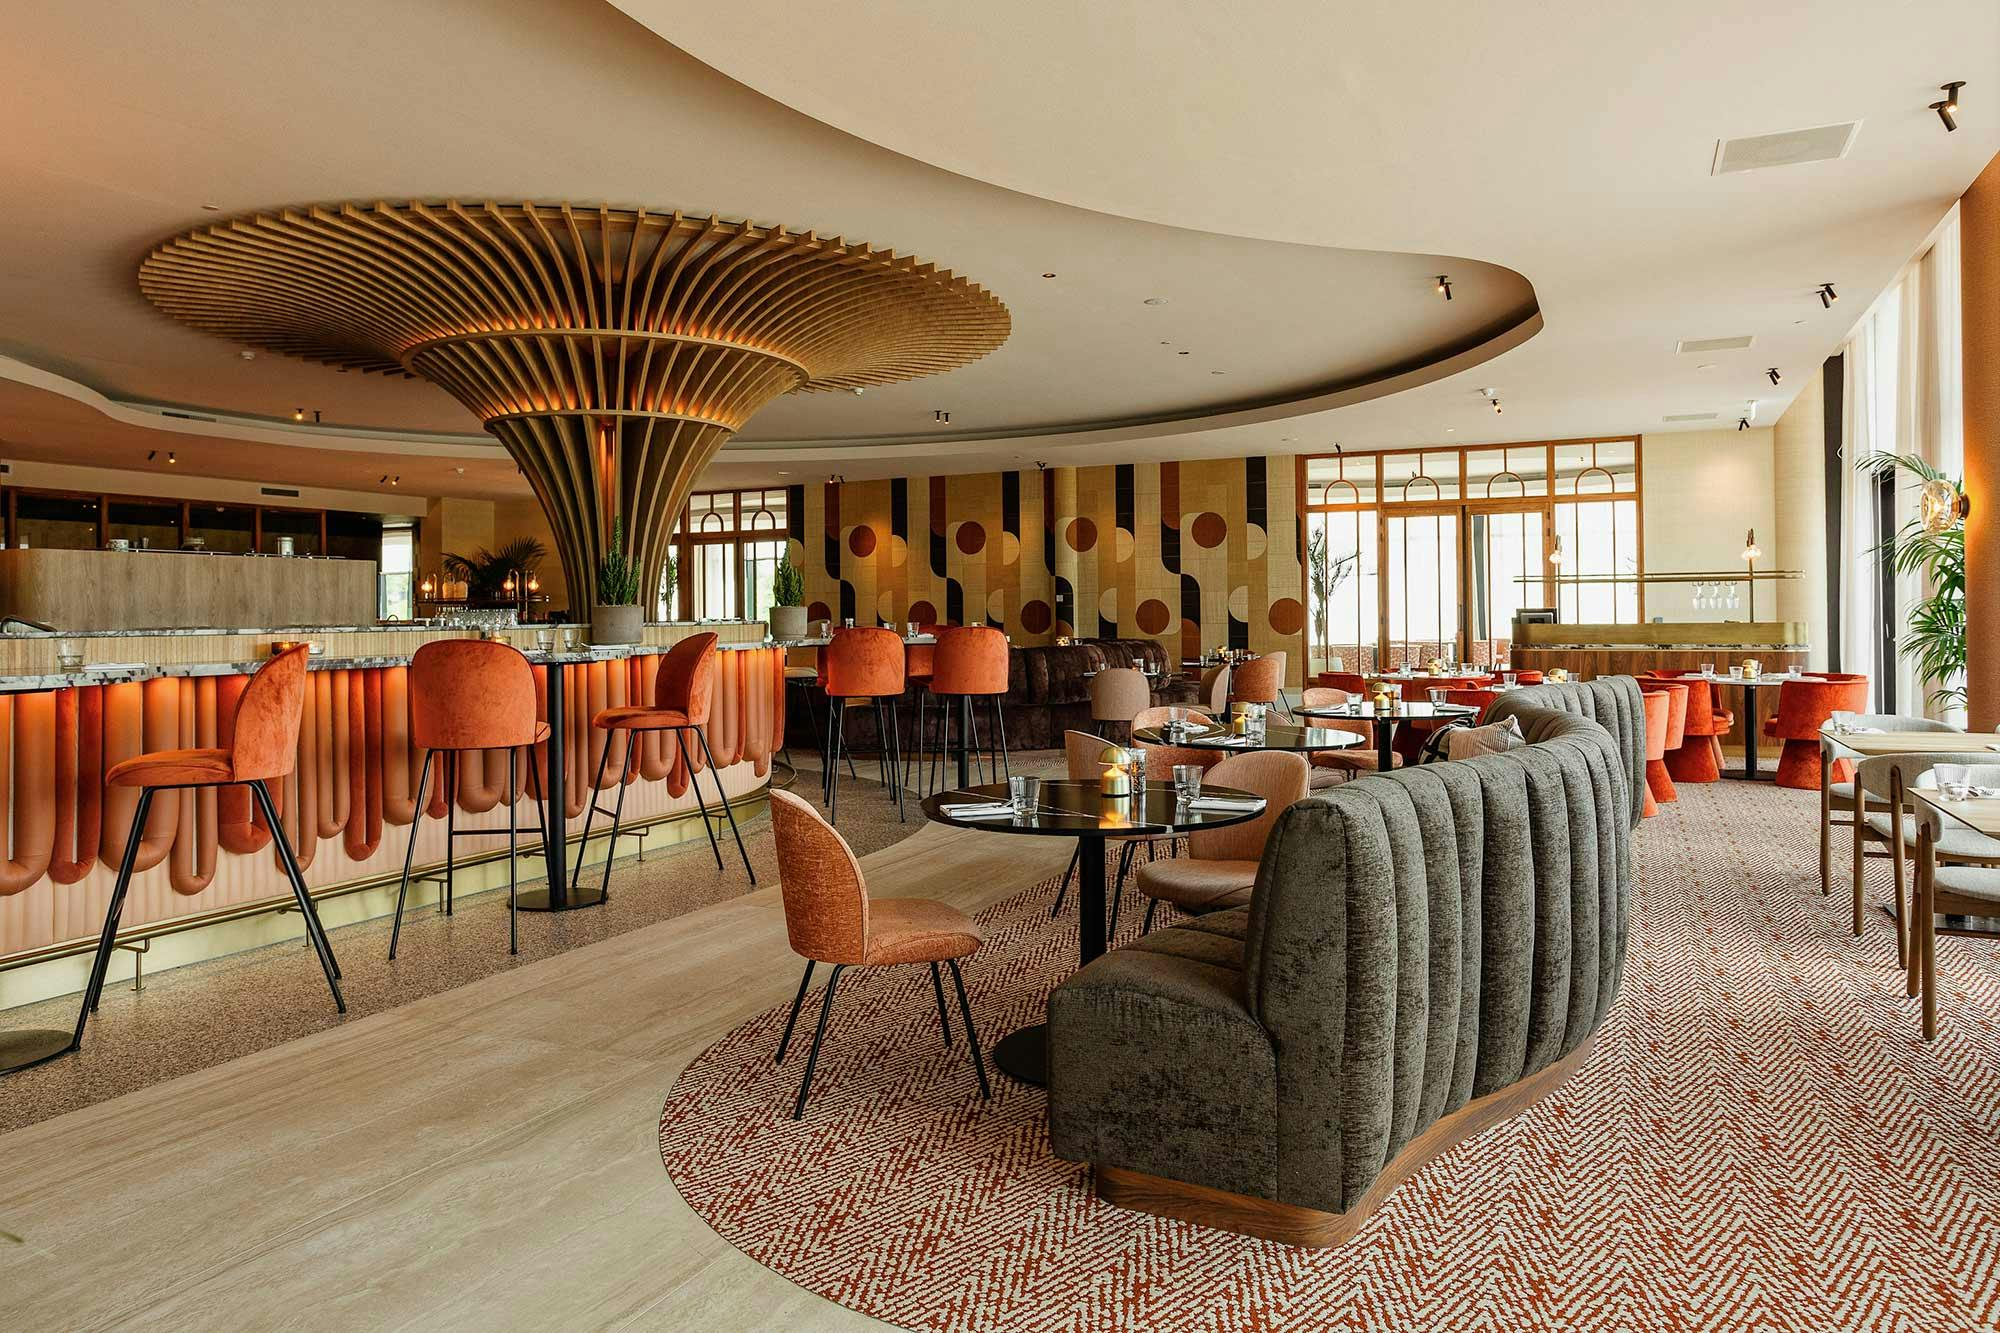 Numéro d'image 45 de la section actuelle de DKTN Laurent brings a refined, rich and reliable look to the tables of this new Ta-Kumi restaurant in Madrid de Cosentino France